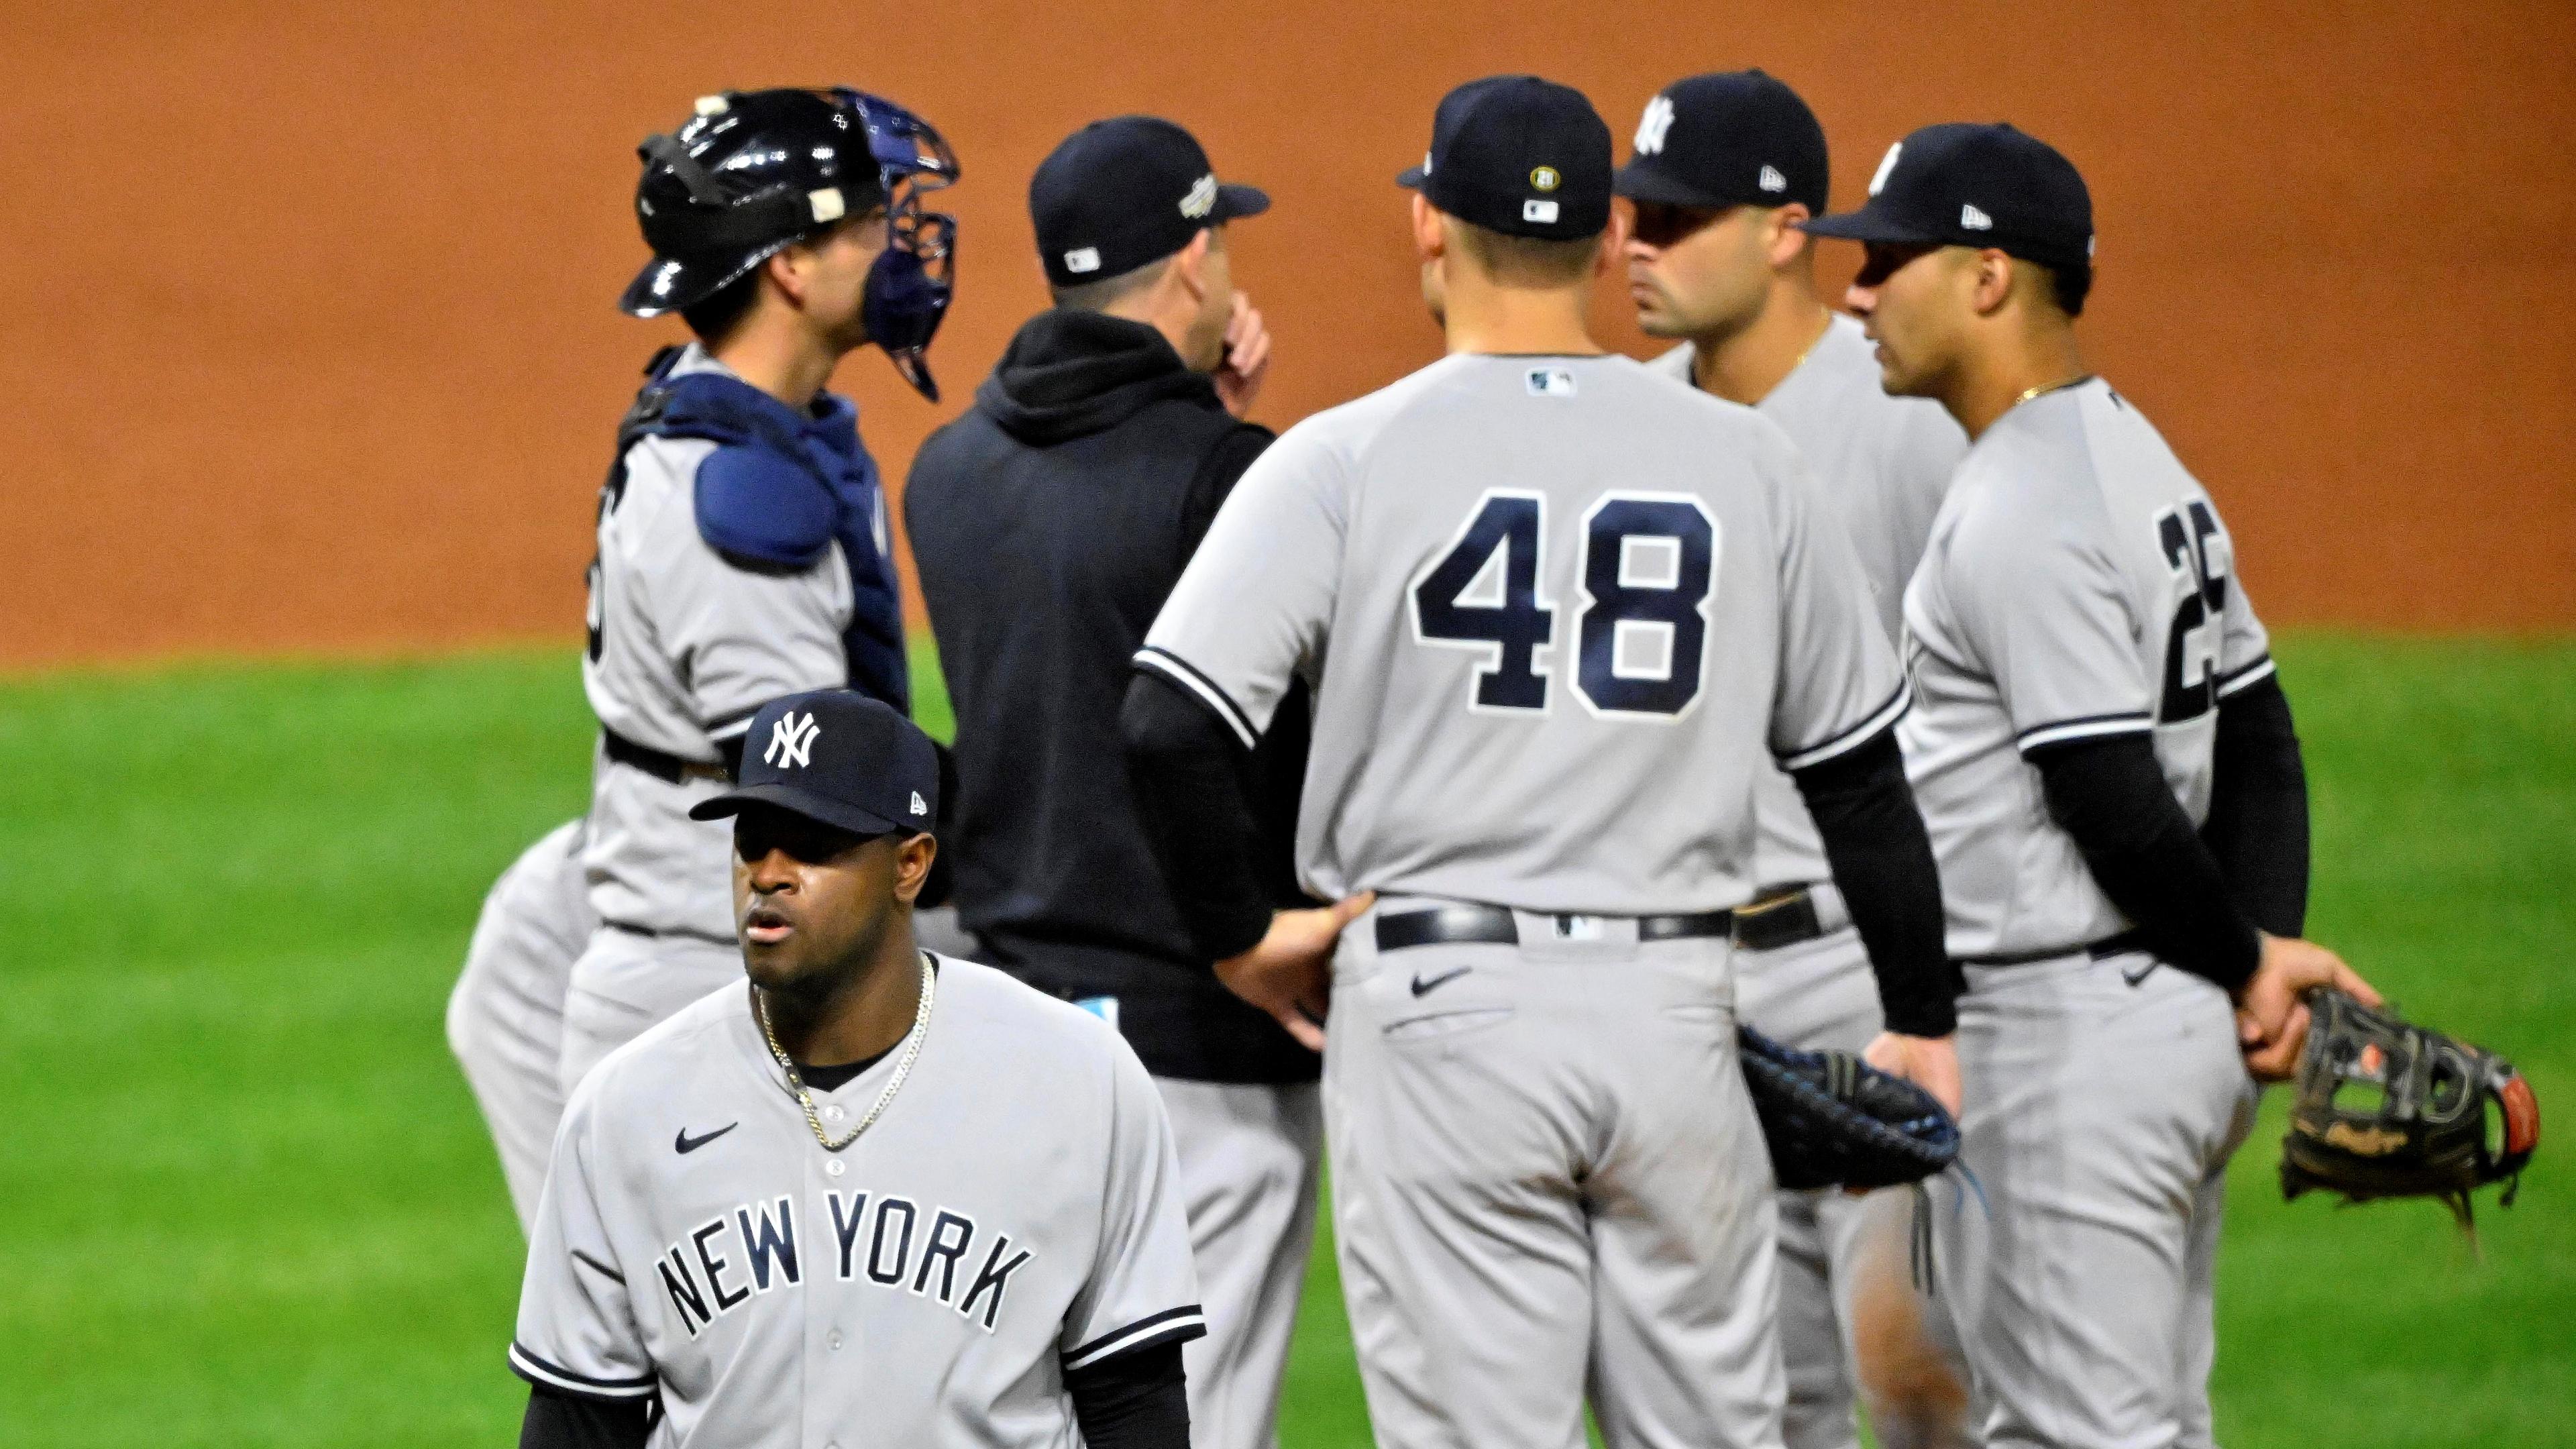 Oct 15, 2022; Cleveland, Ohio, USA; New York Yankees starting pitcher Luis Severino (40) walks toward the dug out after being replaced on the mound in the sixth inning during game three of the NLDS for the 2022 MLB Playoffs against the Cleveland Guardians at Progressive Field. Mandatory Credit: David Richard-USA TODAY Sports / © David Richard-USA TODAY Sports